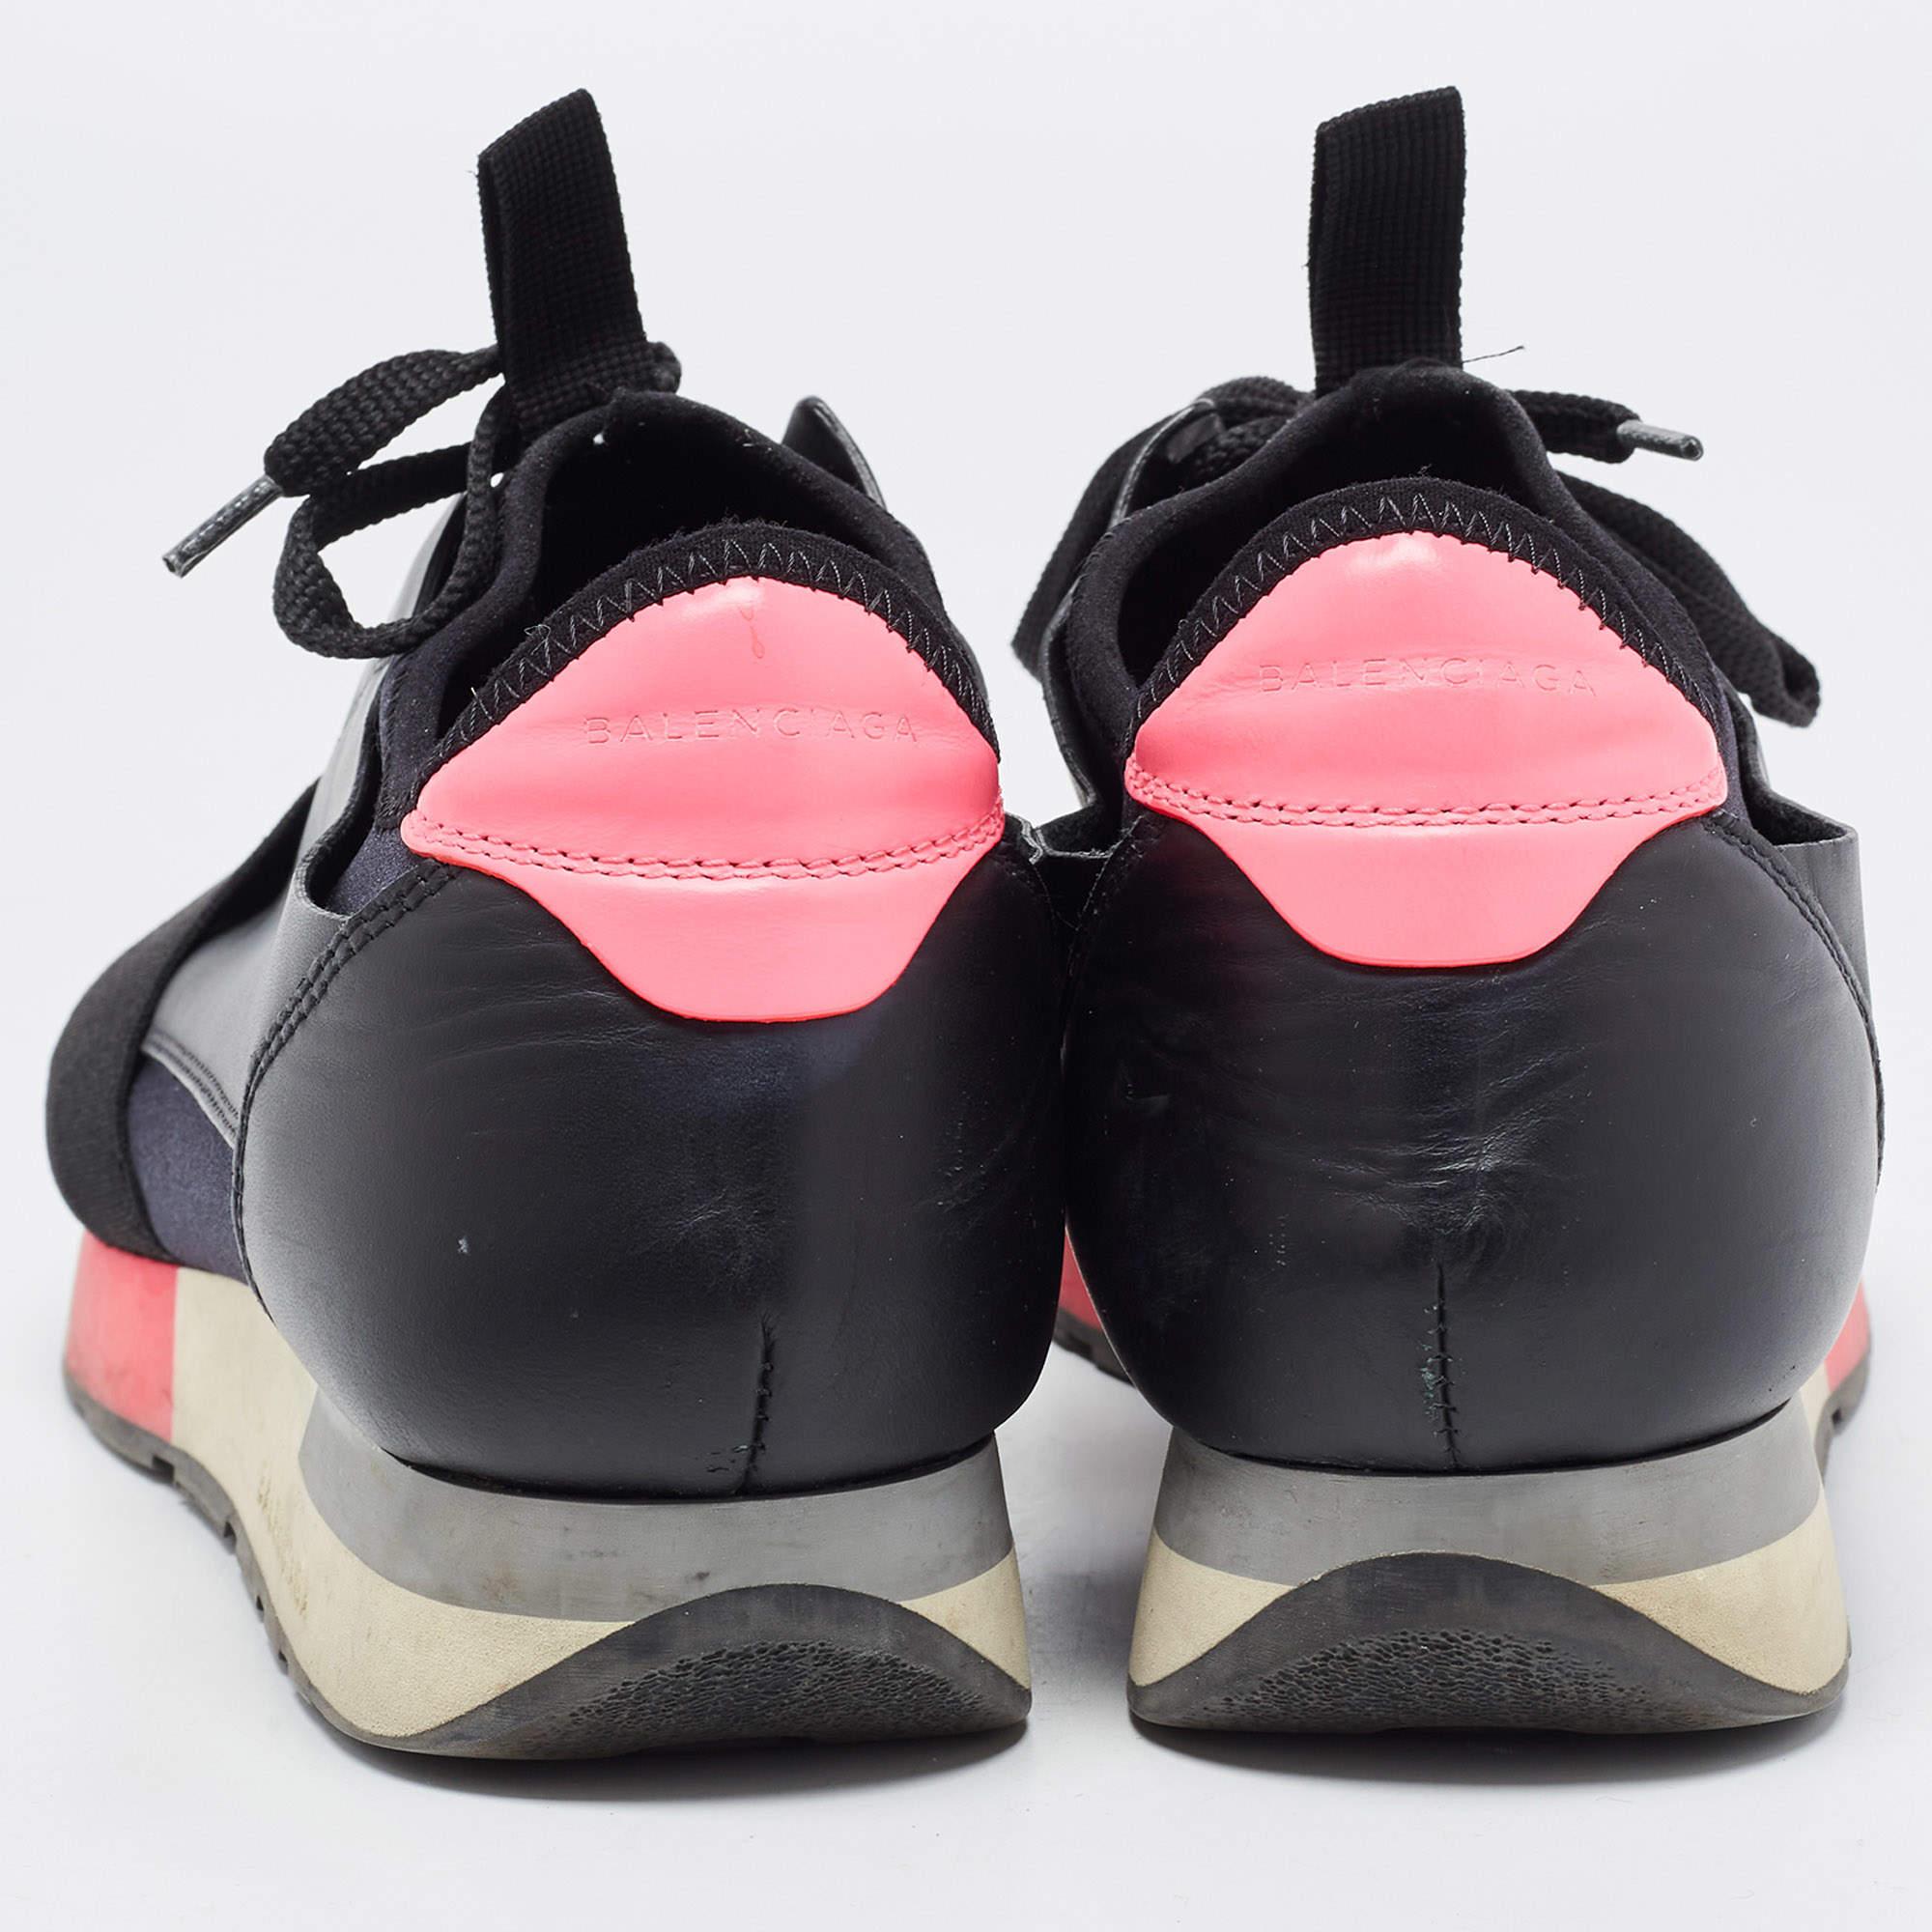 Balenciaga Black/Pink Leather and Fabric Race Runner Sneakers Size 39 In Good Condition For Sale In Dubai, Al Qouz 2